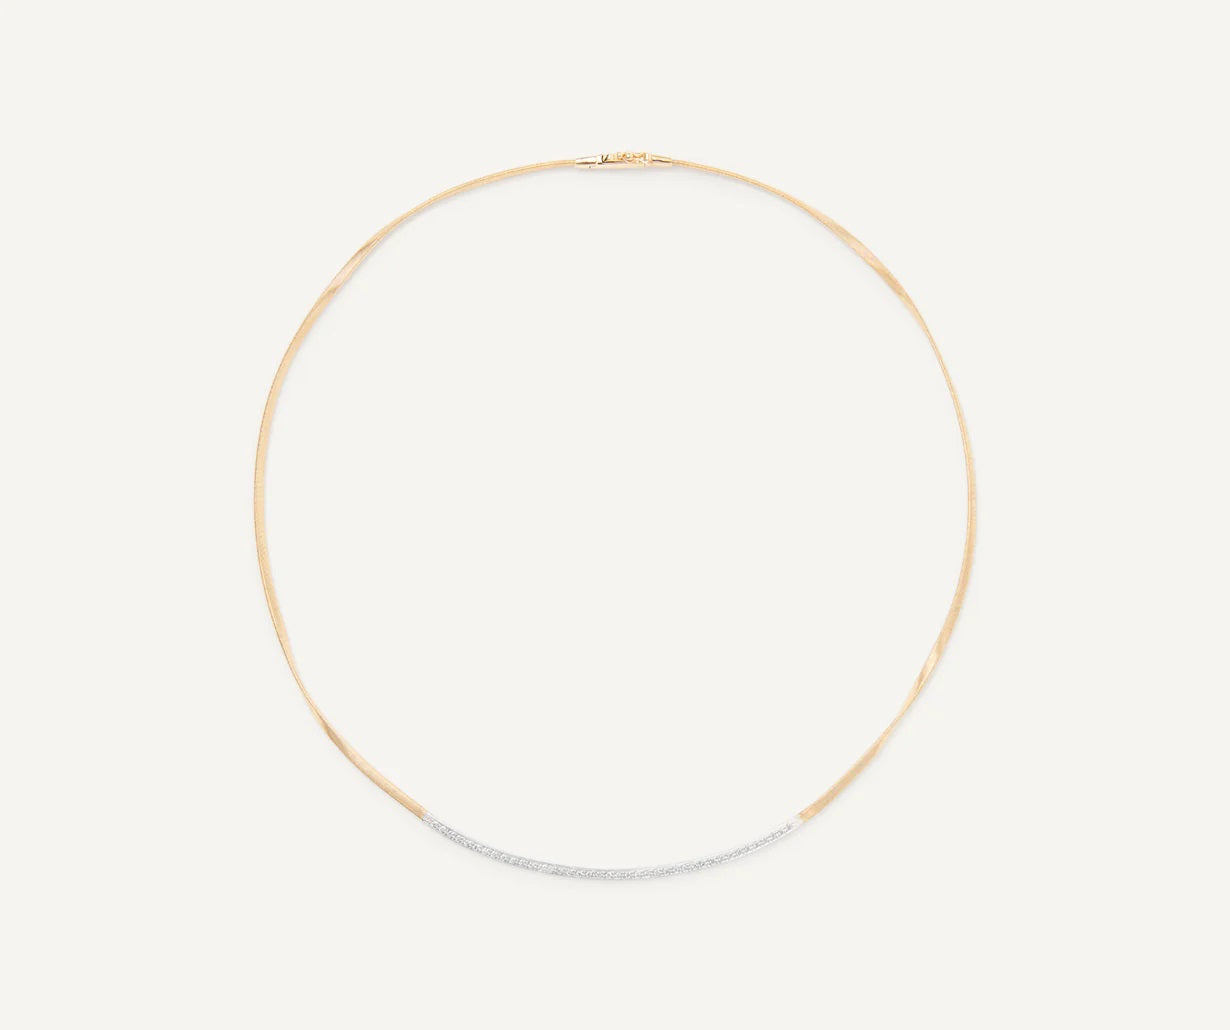 18K YELLOW GOLD COIL NECKLACE WITH DIAMOND BAR FROM THE MARRAKECH COLLECTION